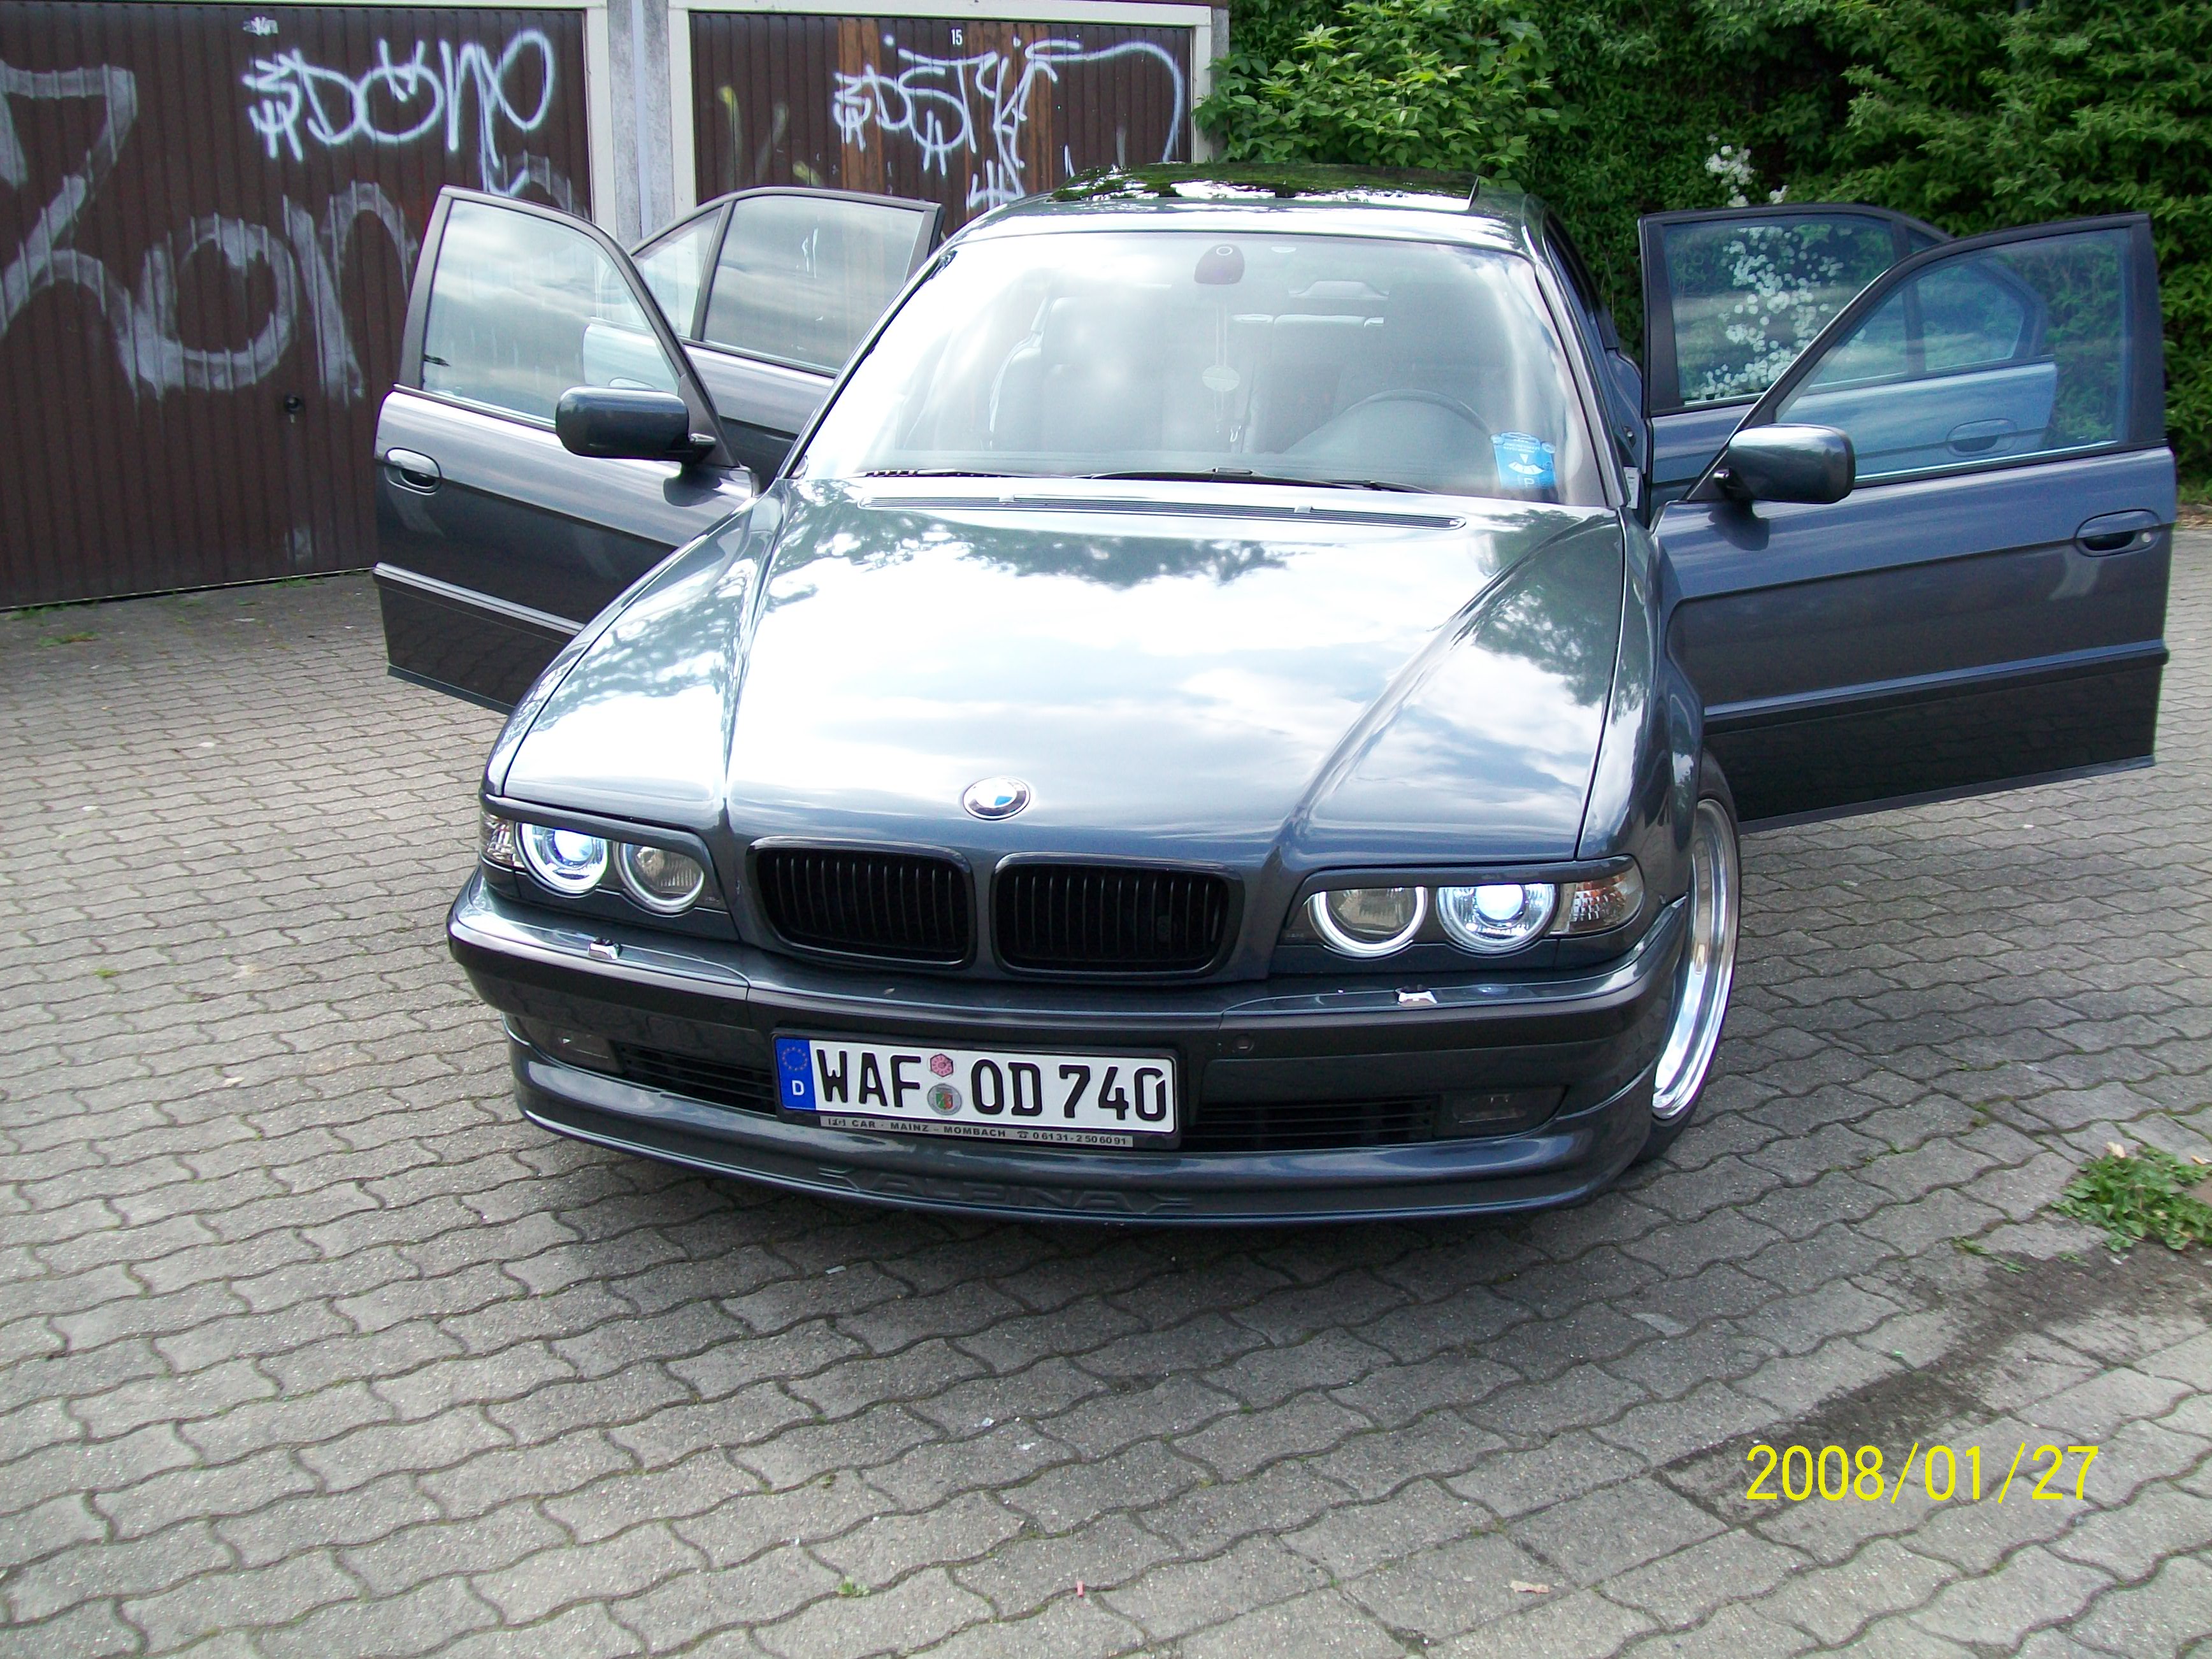 Bmw 740d e38 chip tuning #3